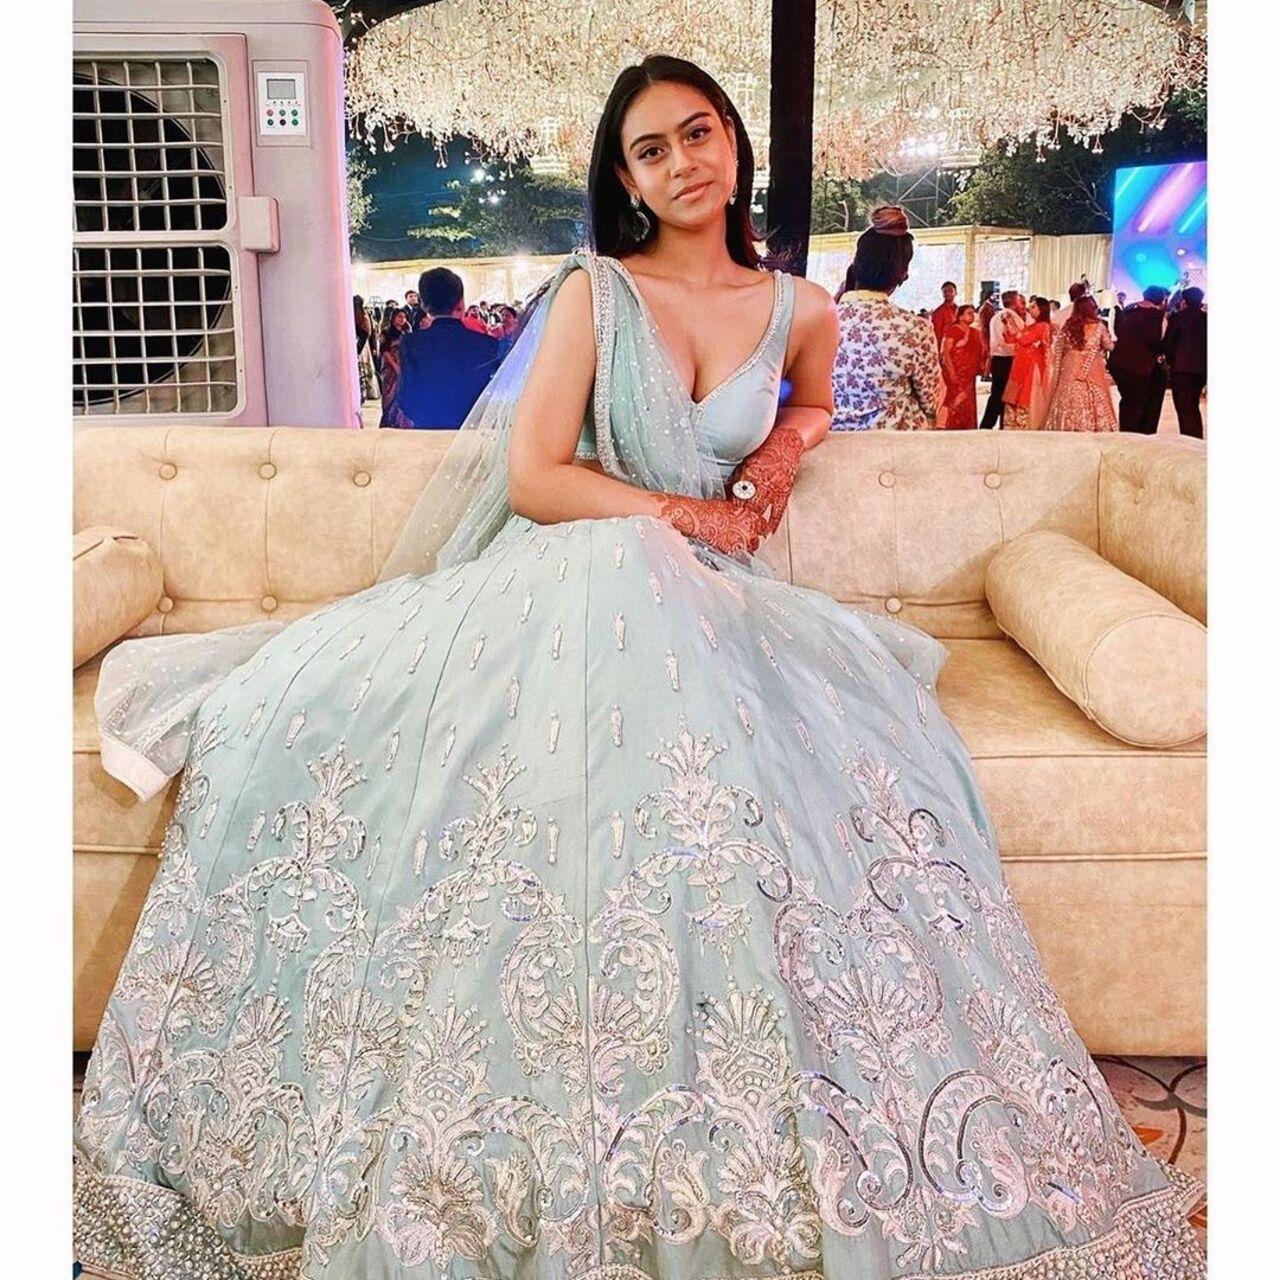 Ajay Devgn and Kajol's daughter Nysa pulls off a sky blue shimmery lehenga by Lulla